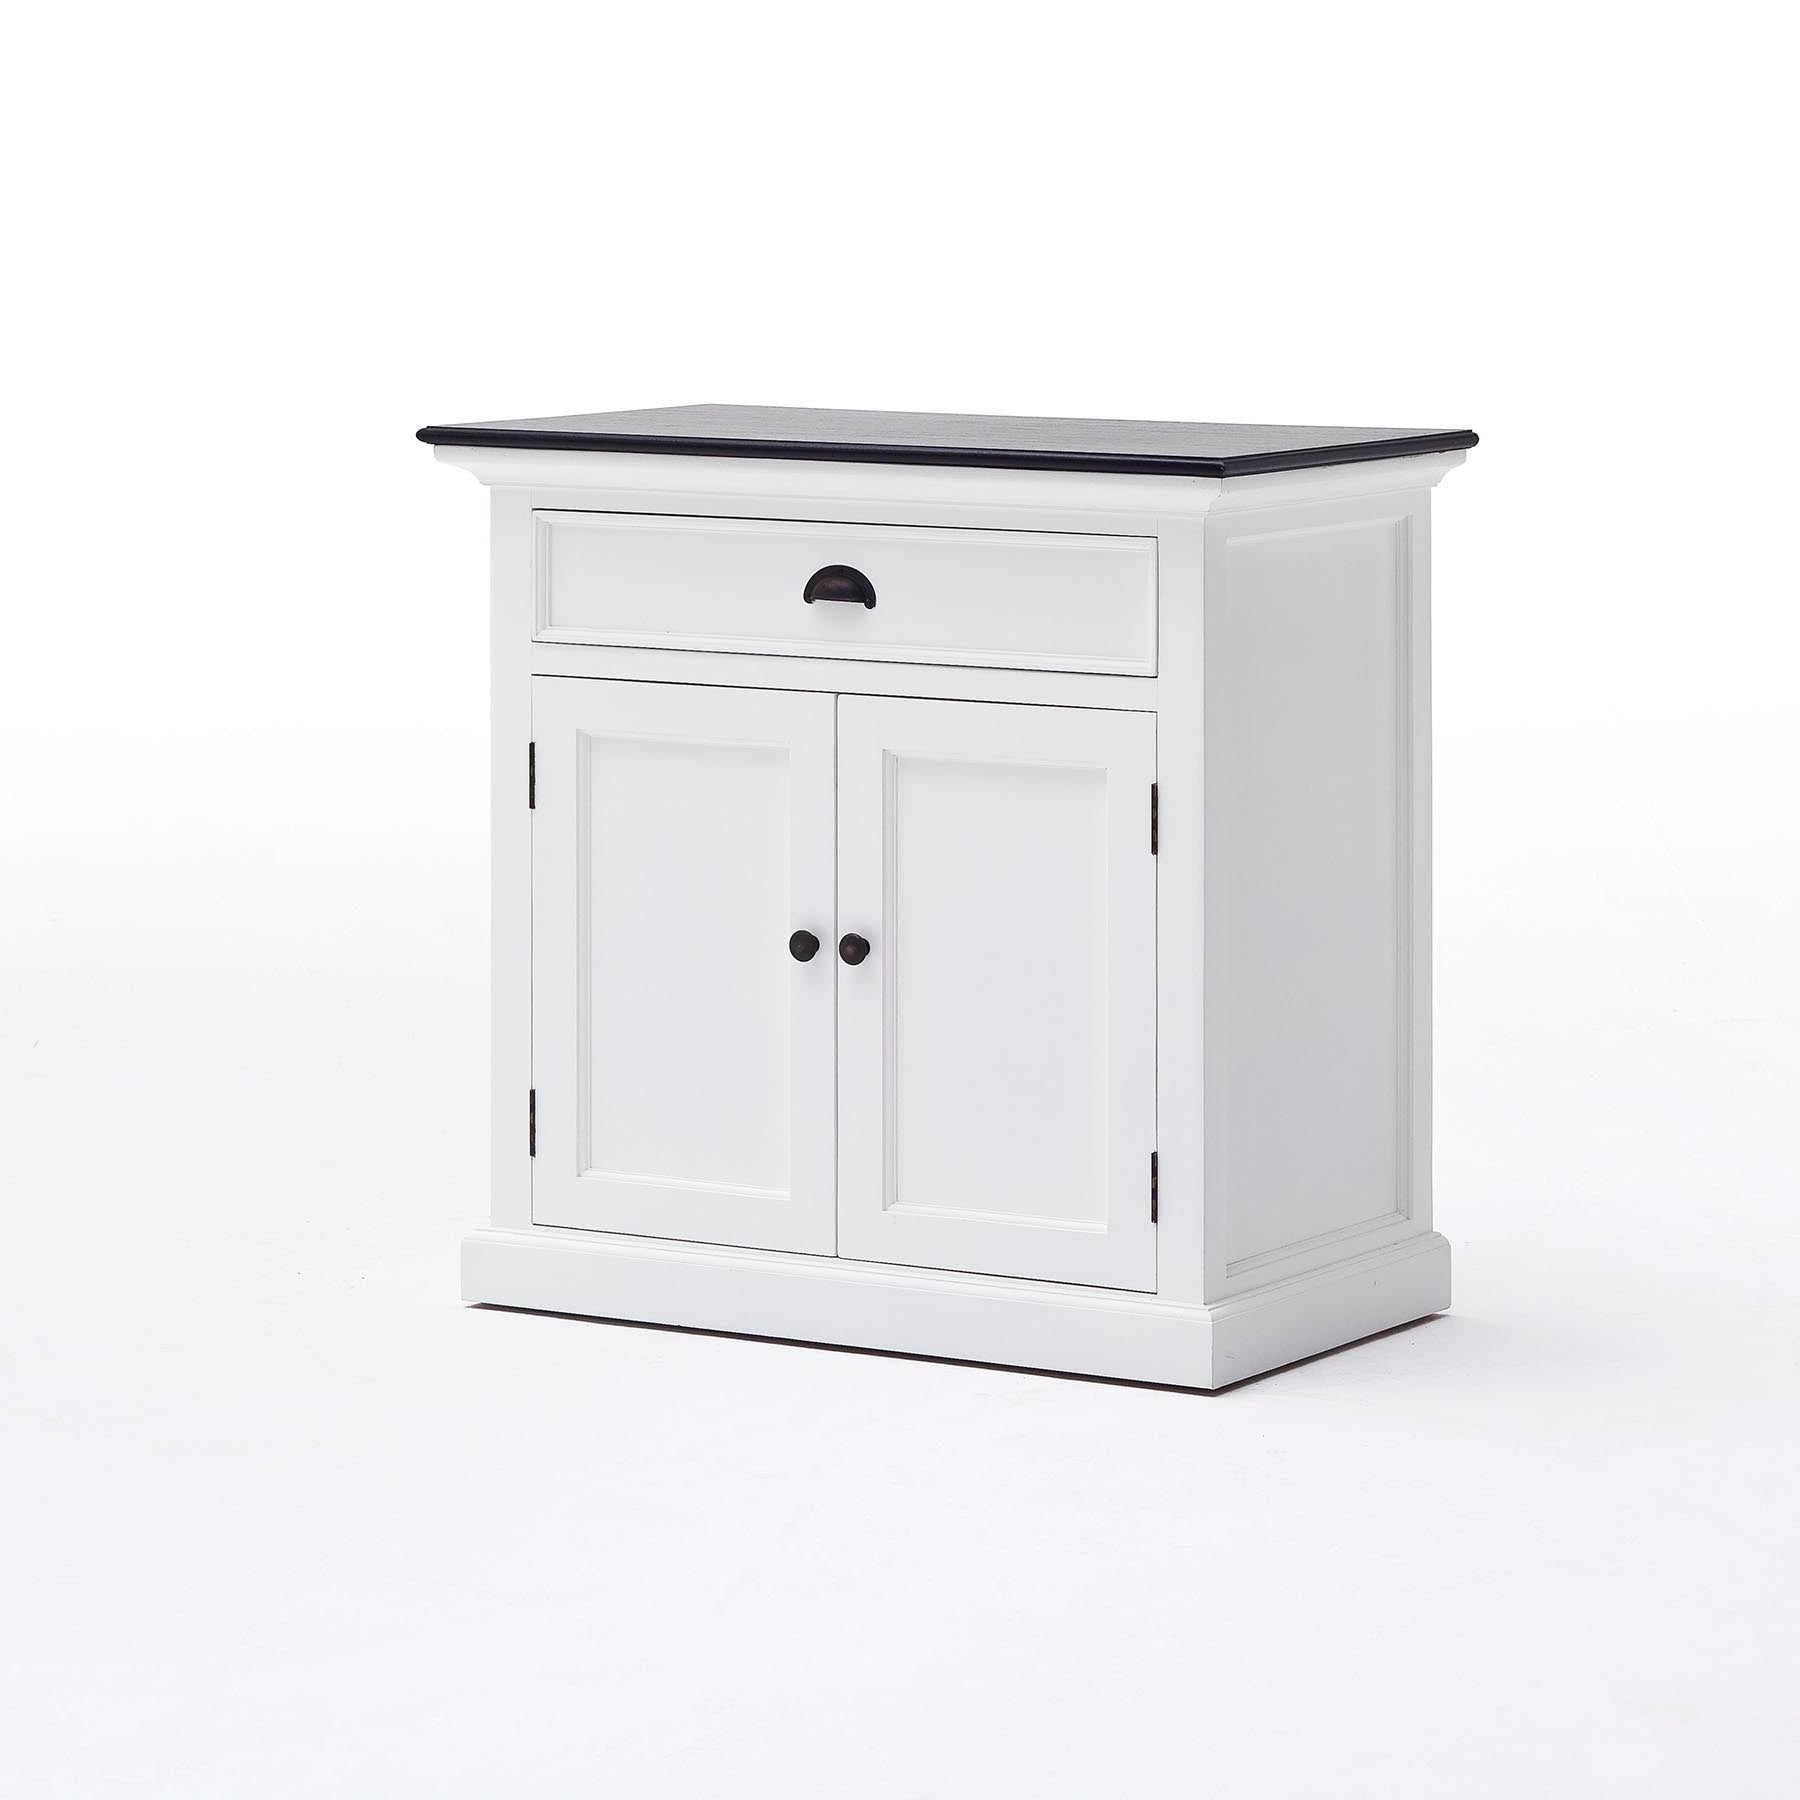 Halifax Contrast Small sideboard with 1 drawer